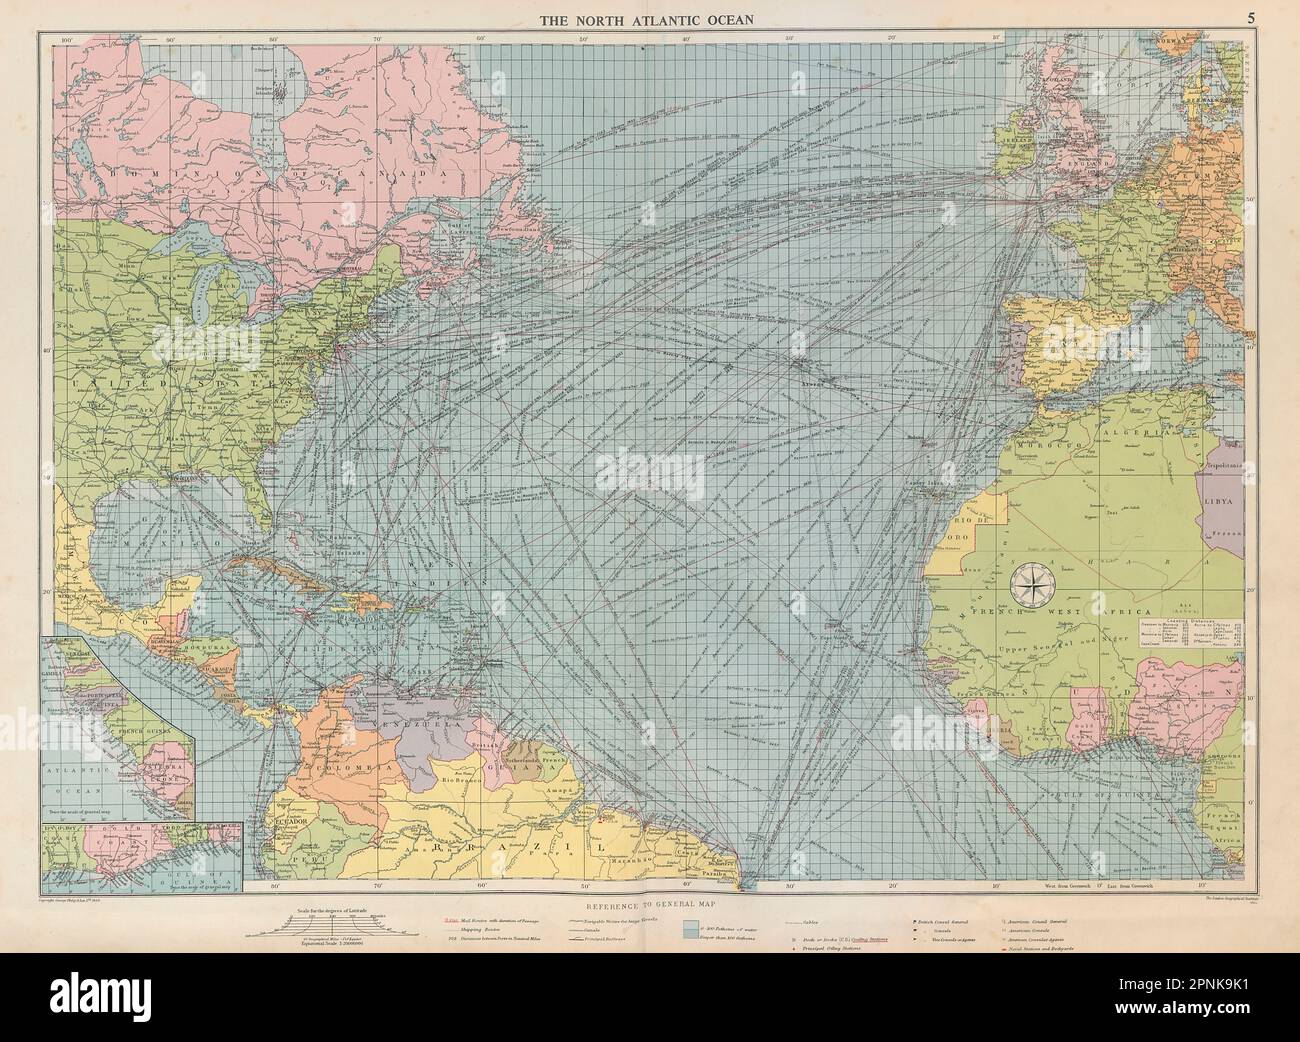 North Atlantic Ocean sea chart. Ports lighthouses mail routes. LARGE 1952 map Stock Photo